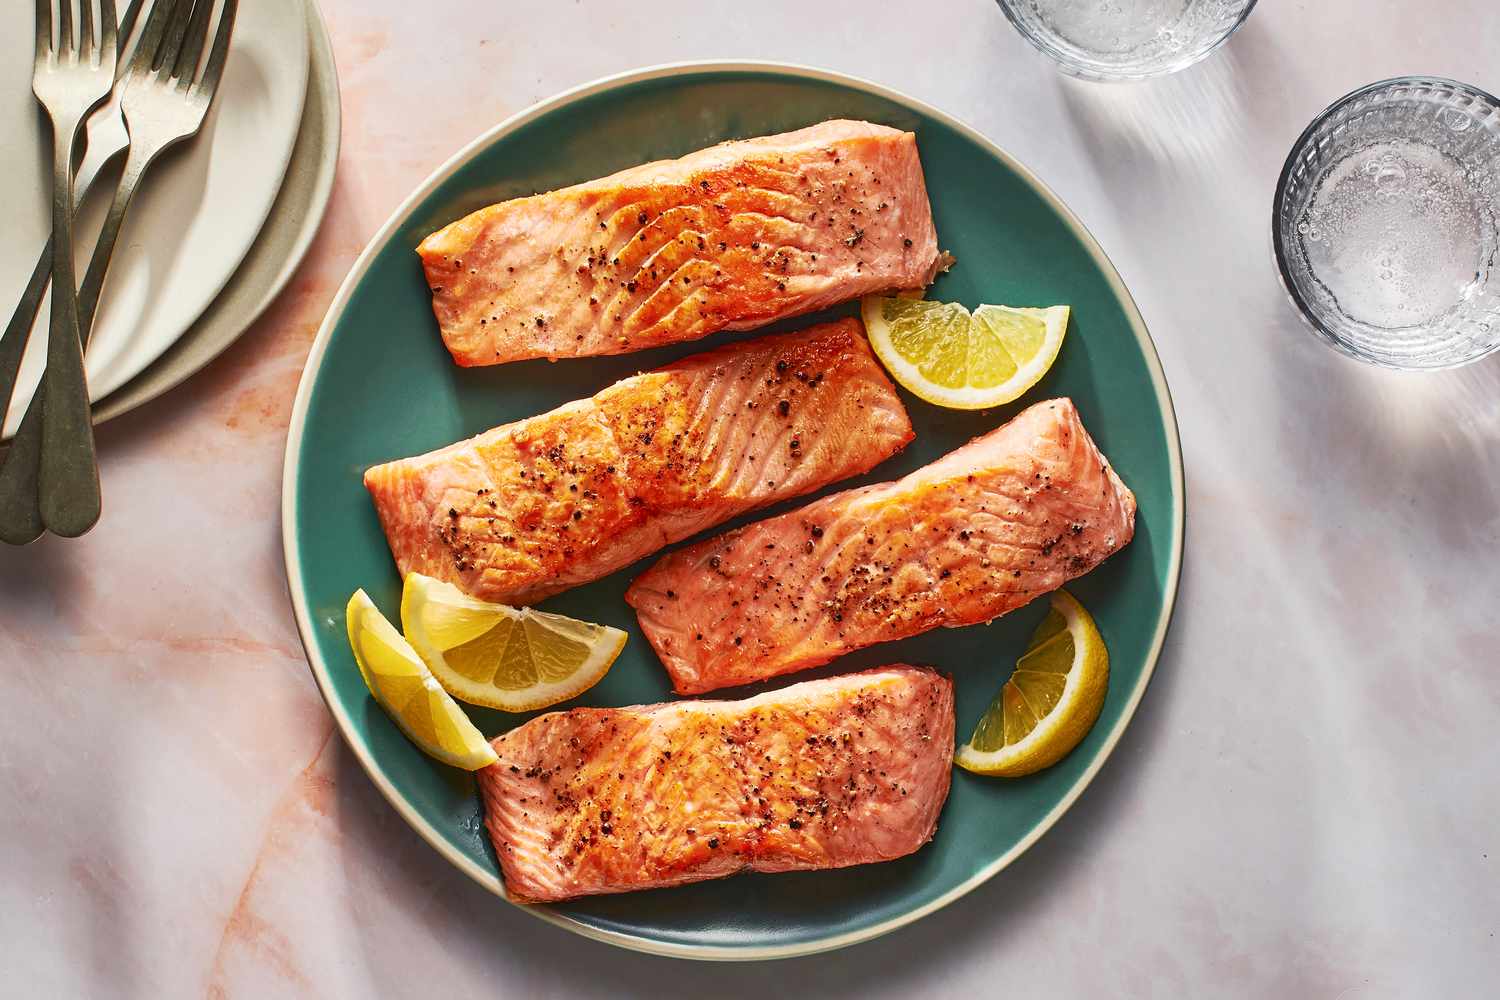 A plate of pan-seared salmon served with lemon slices